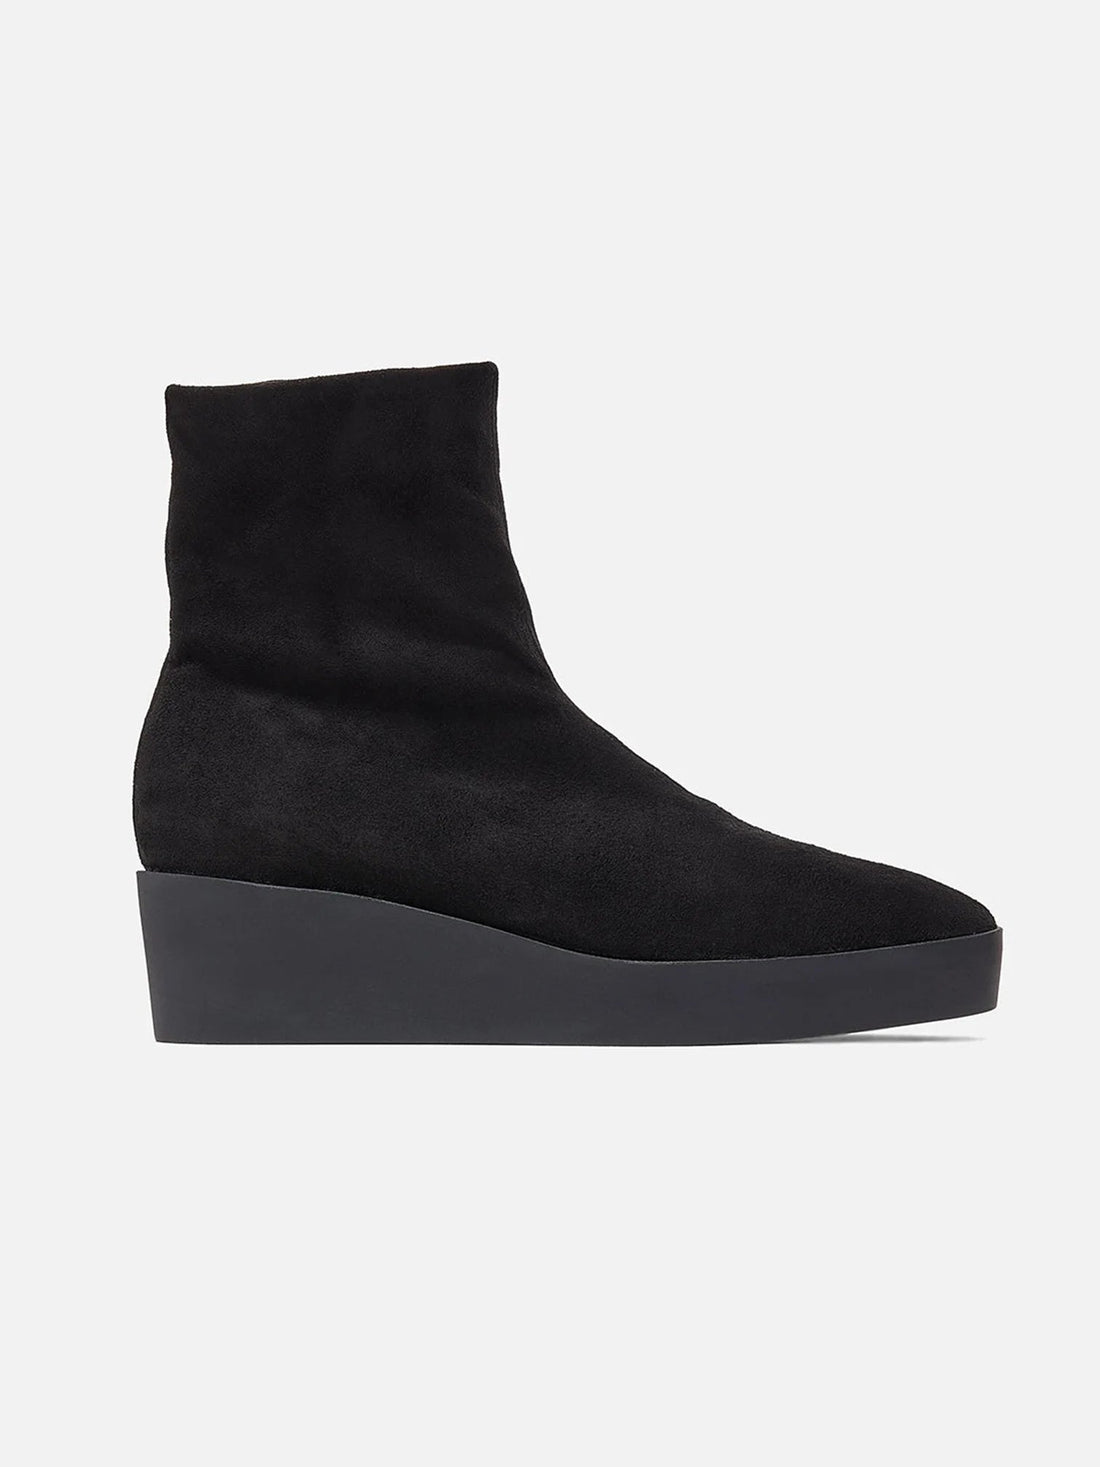 ANKLE BOOTS - LEXA ankle boots, lambskin black - 3606063851398 - Clergerie Paris - Europe